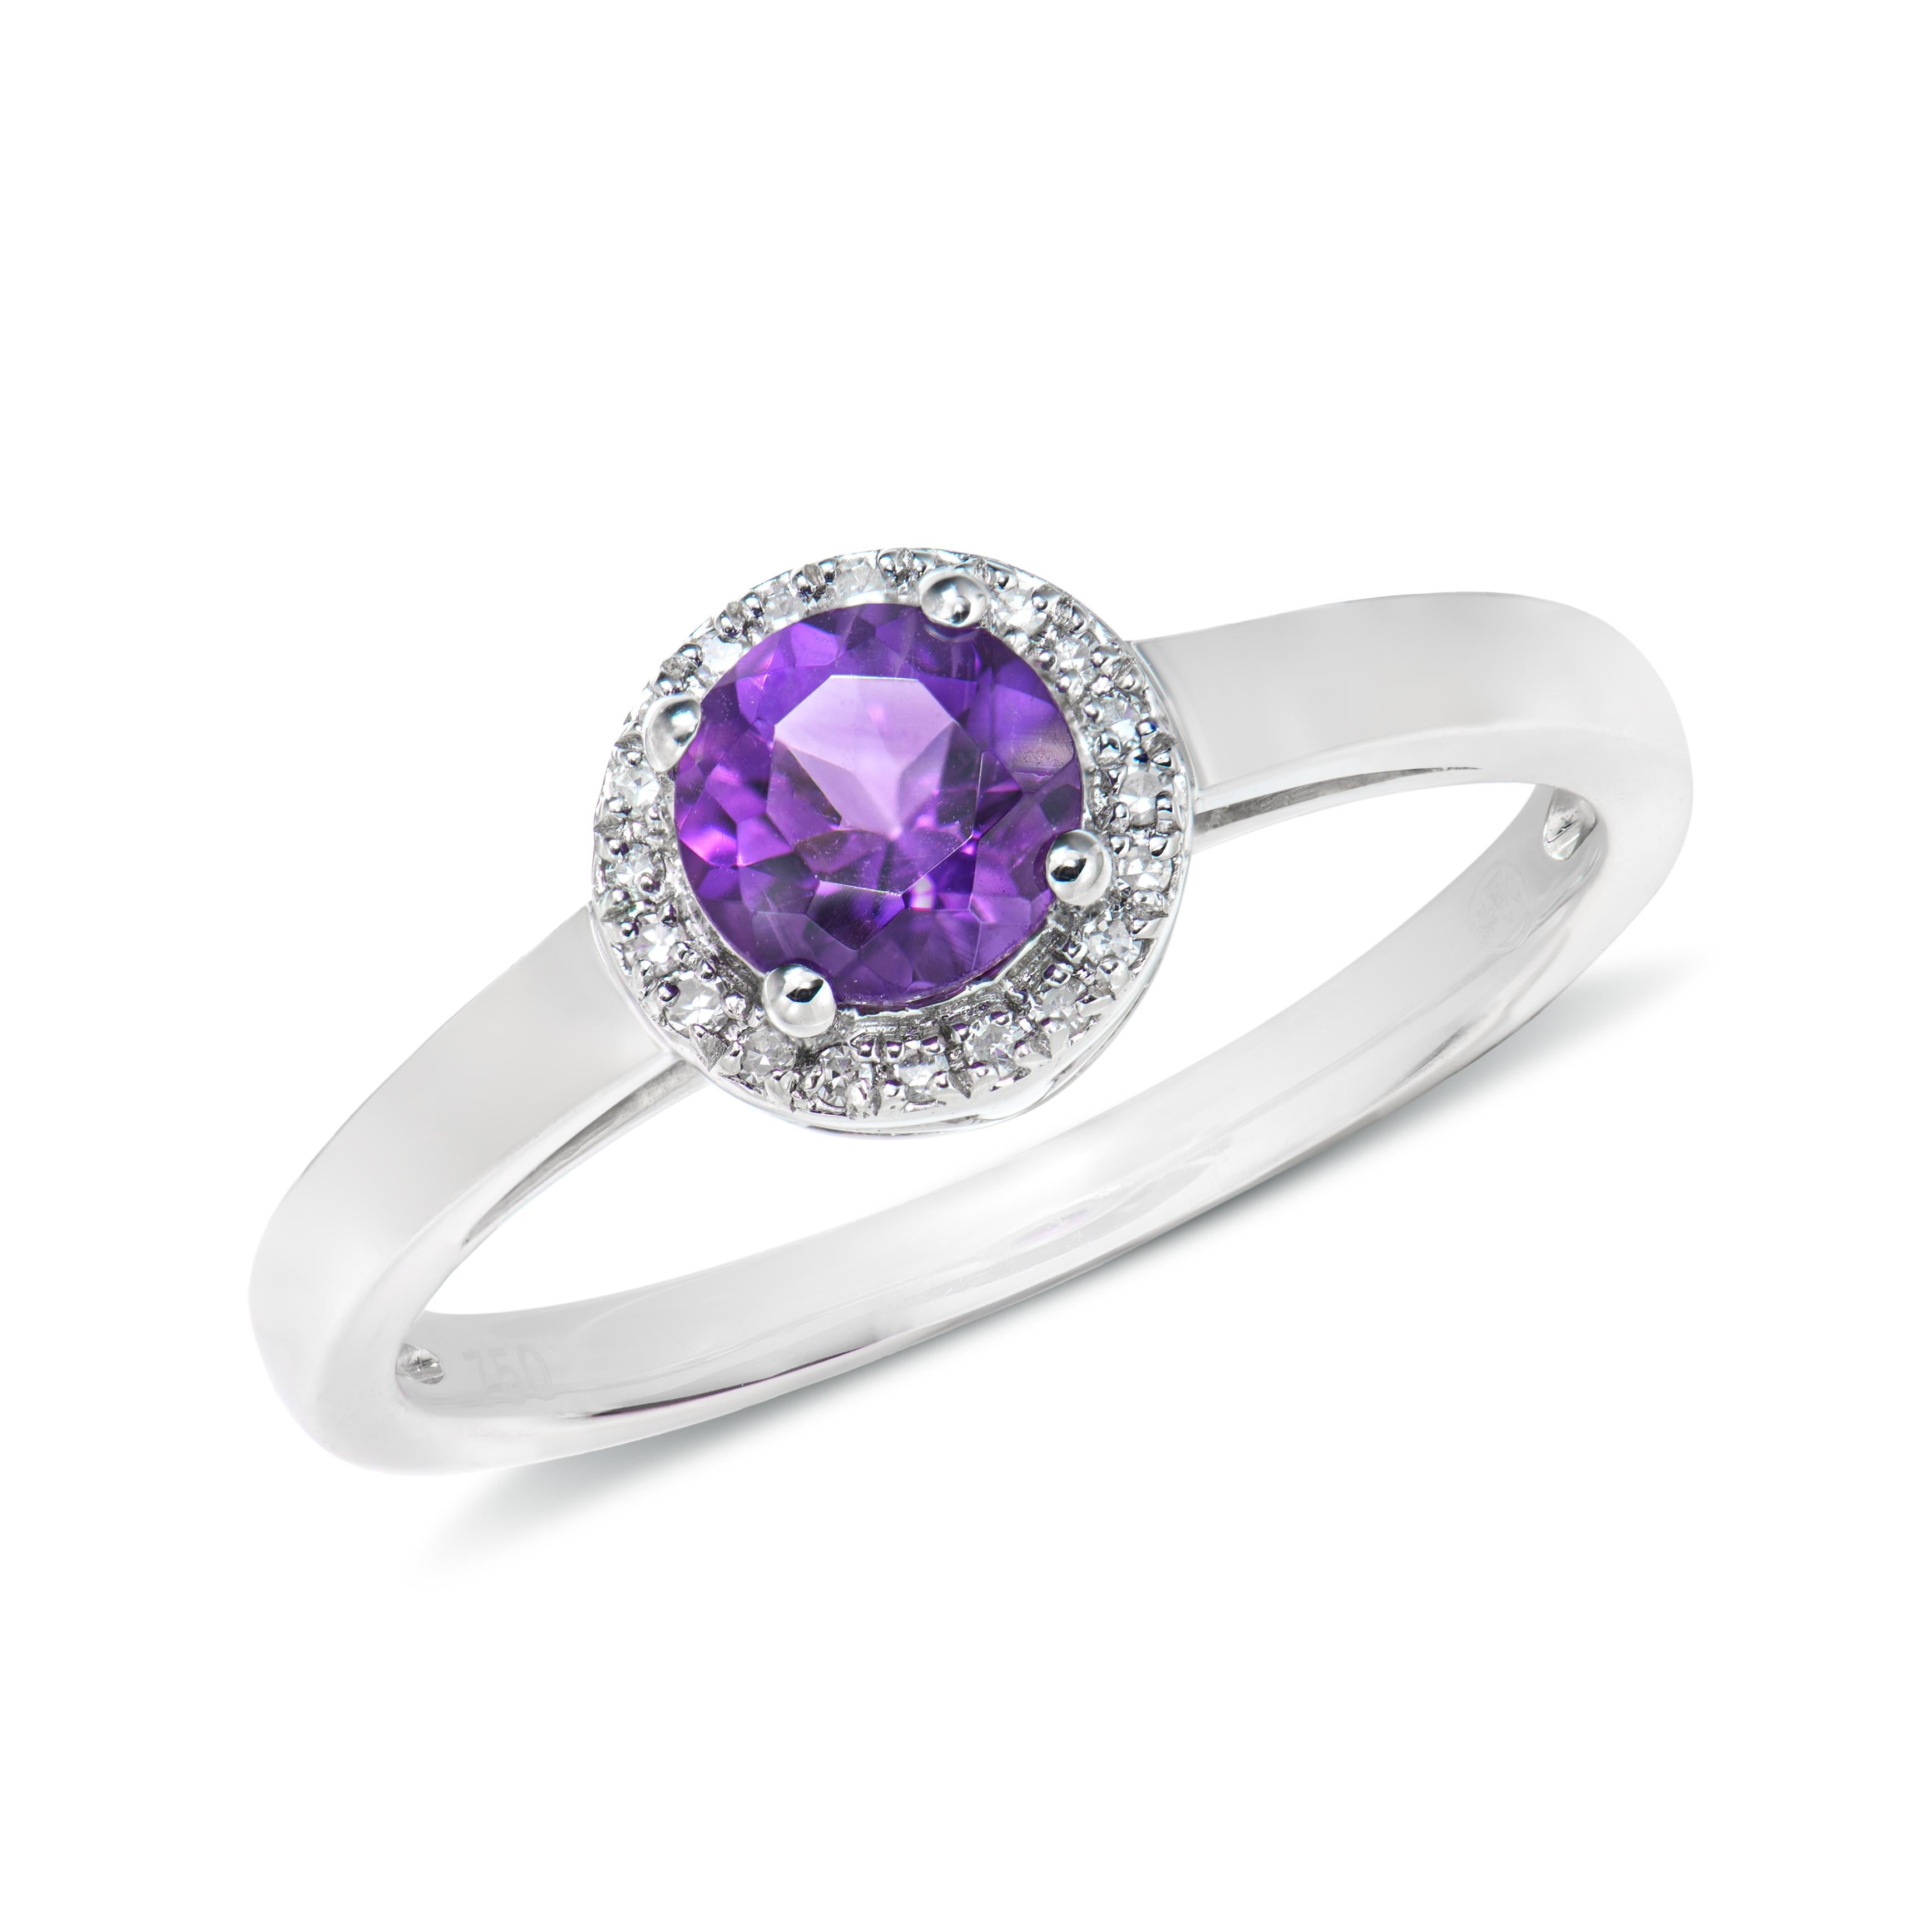 Presented A lovely set of Amethyst for people who value quality and want to wear it to any occasion or celebration. The white gold Amethyst Fancy Ring adorned with diamonds offer a classic yet elegant appearance.

  
Amethyst Fancy Ring in 18Karat